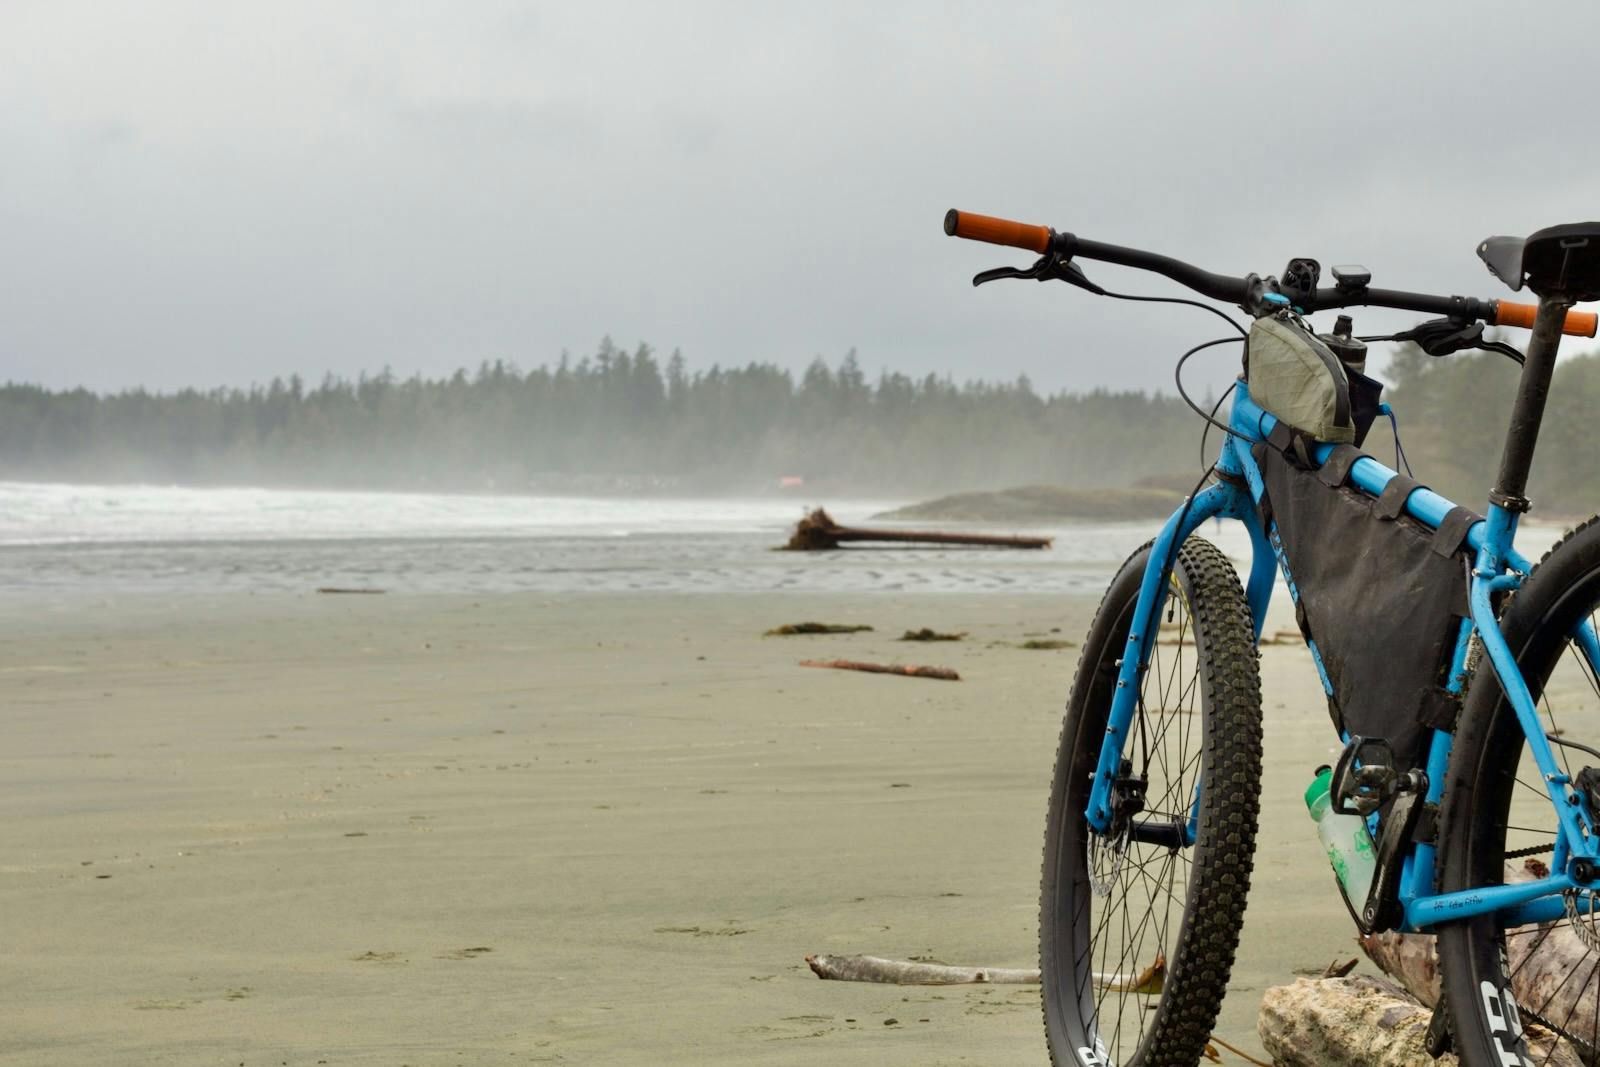 Cycling Tofino: Riding Canada's Top Surf Spot